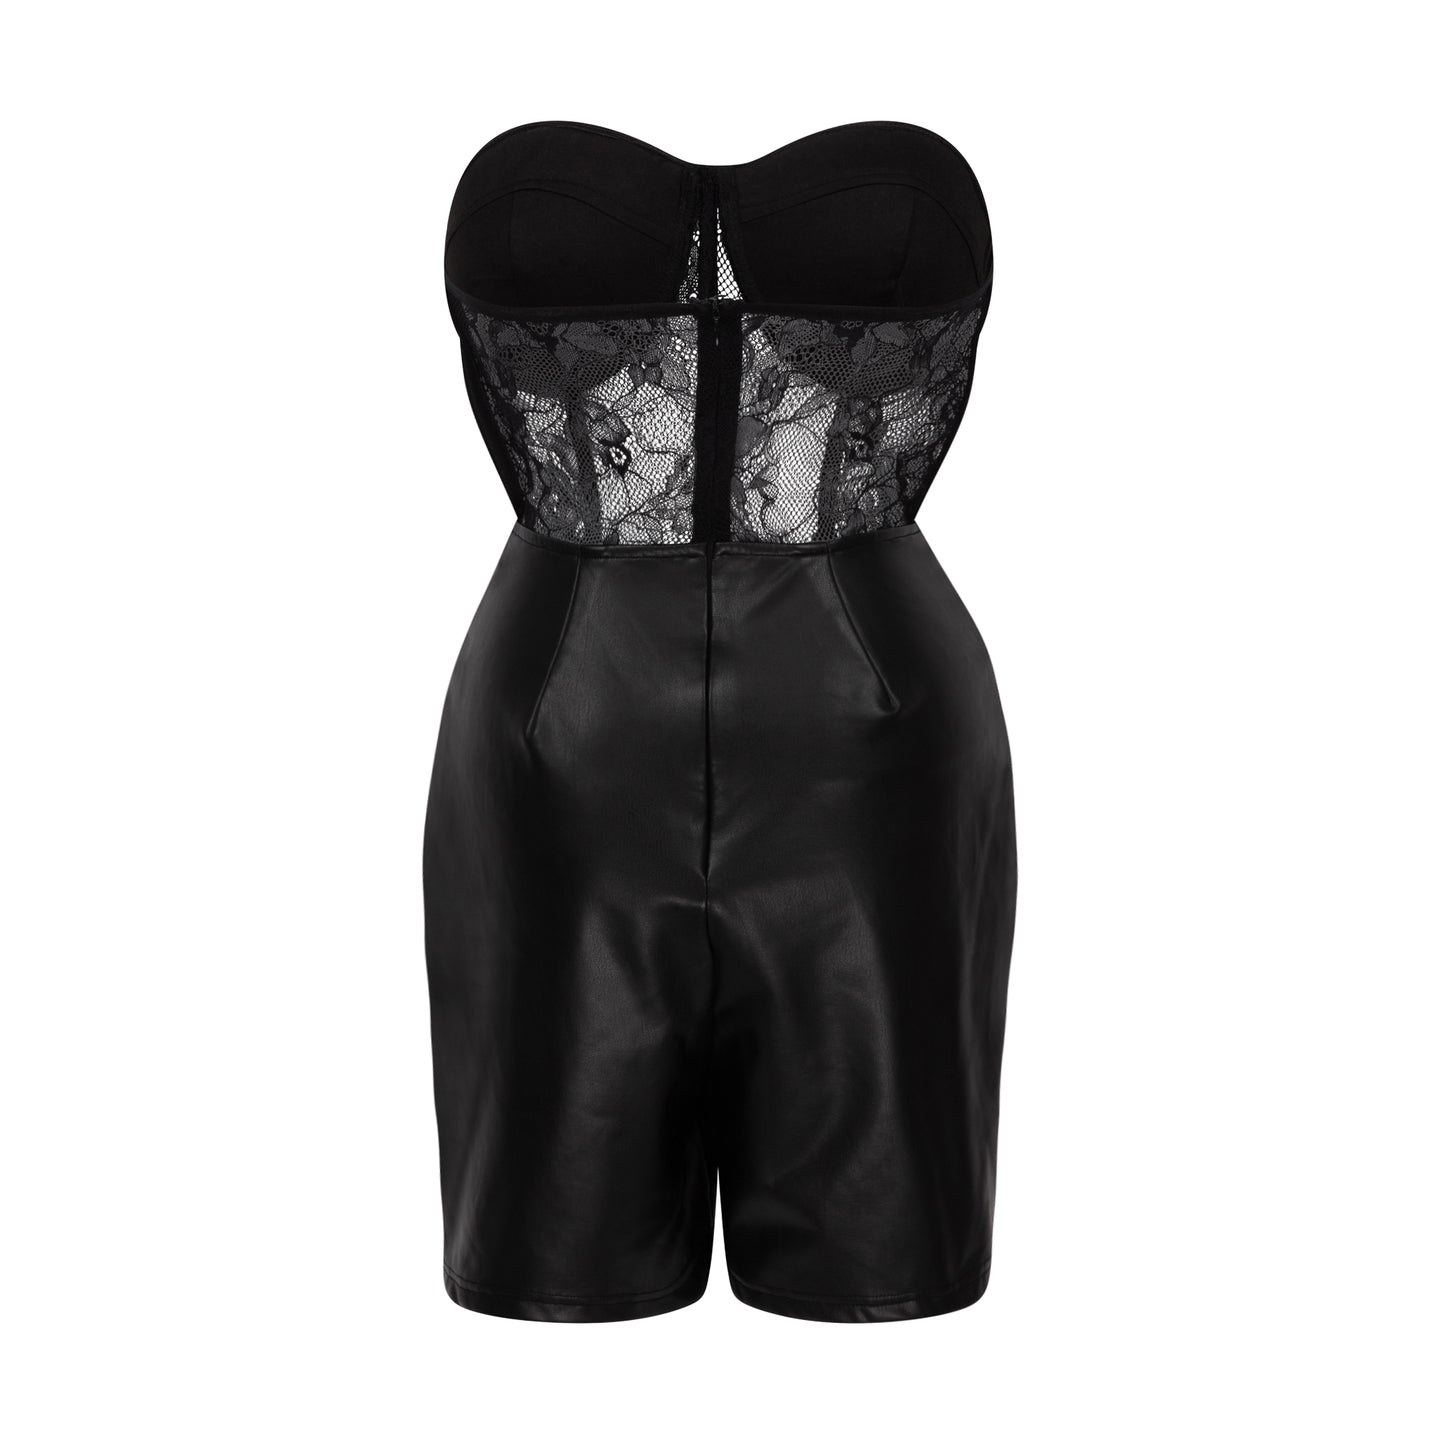 SISI - Black Corset Leather Lace Playsuit